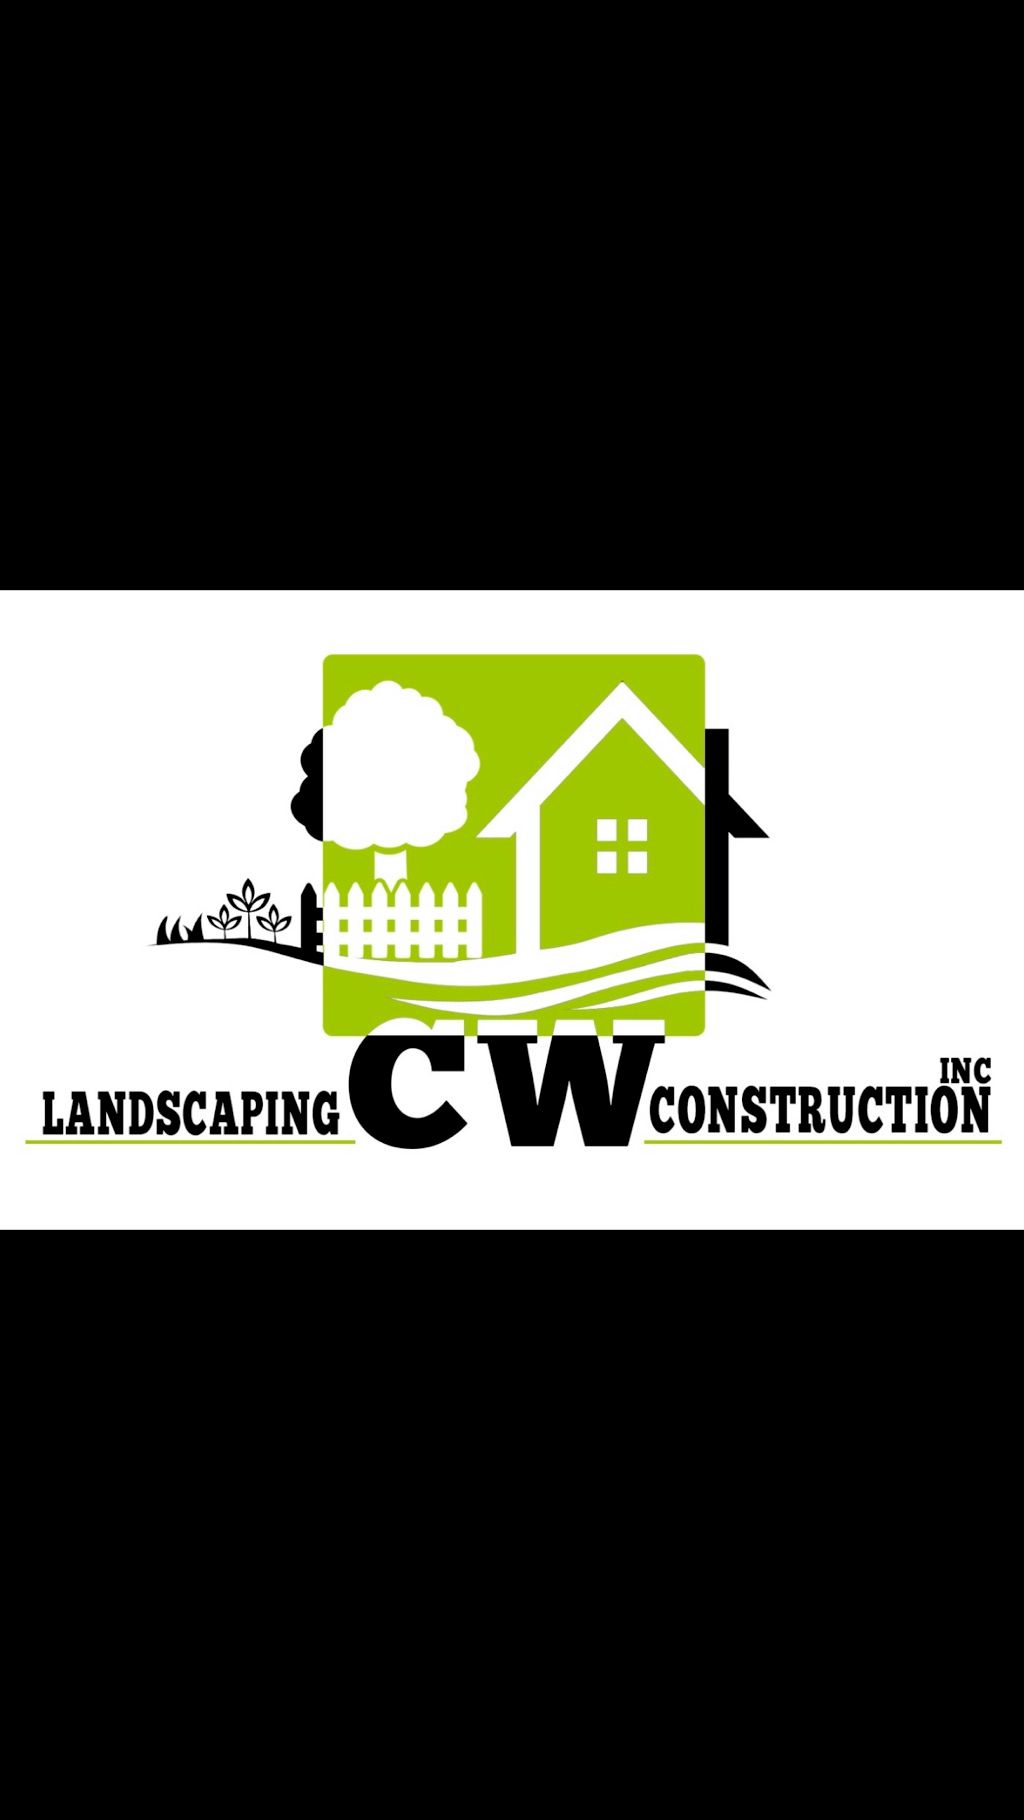 CW Landscaping and Construction Inc.